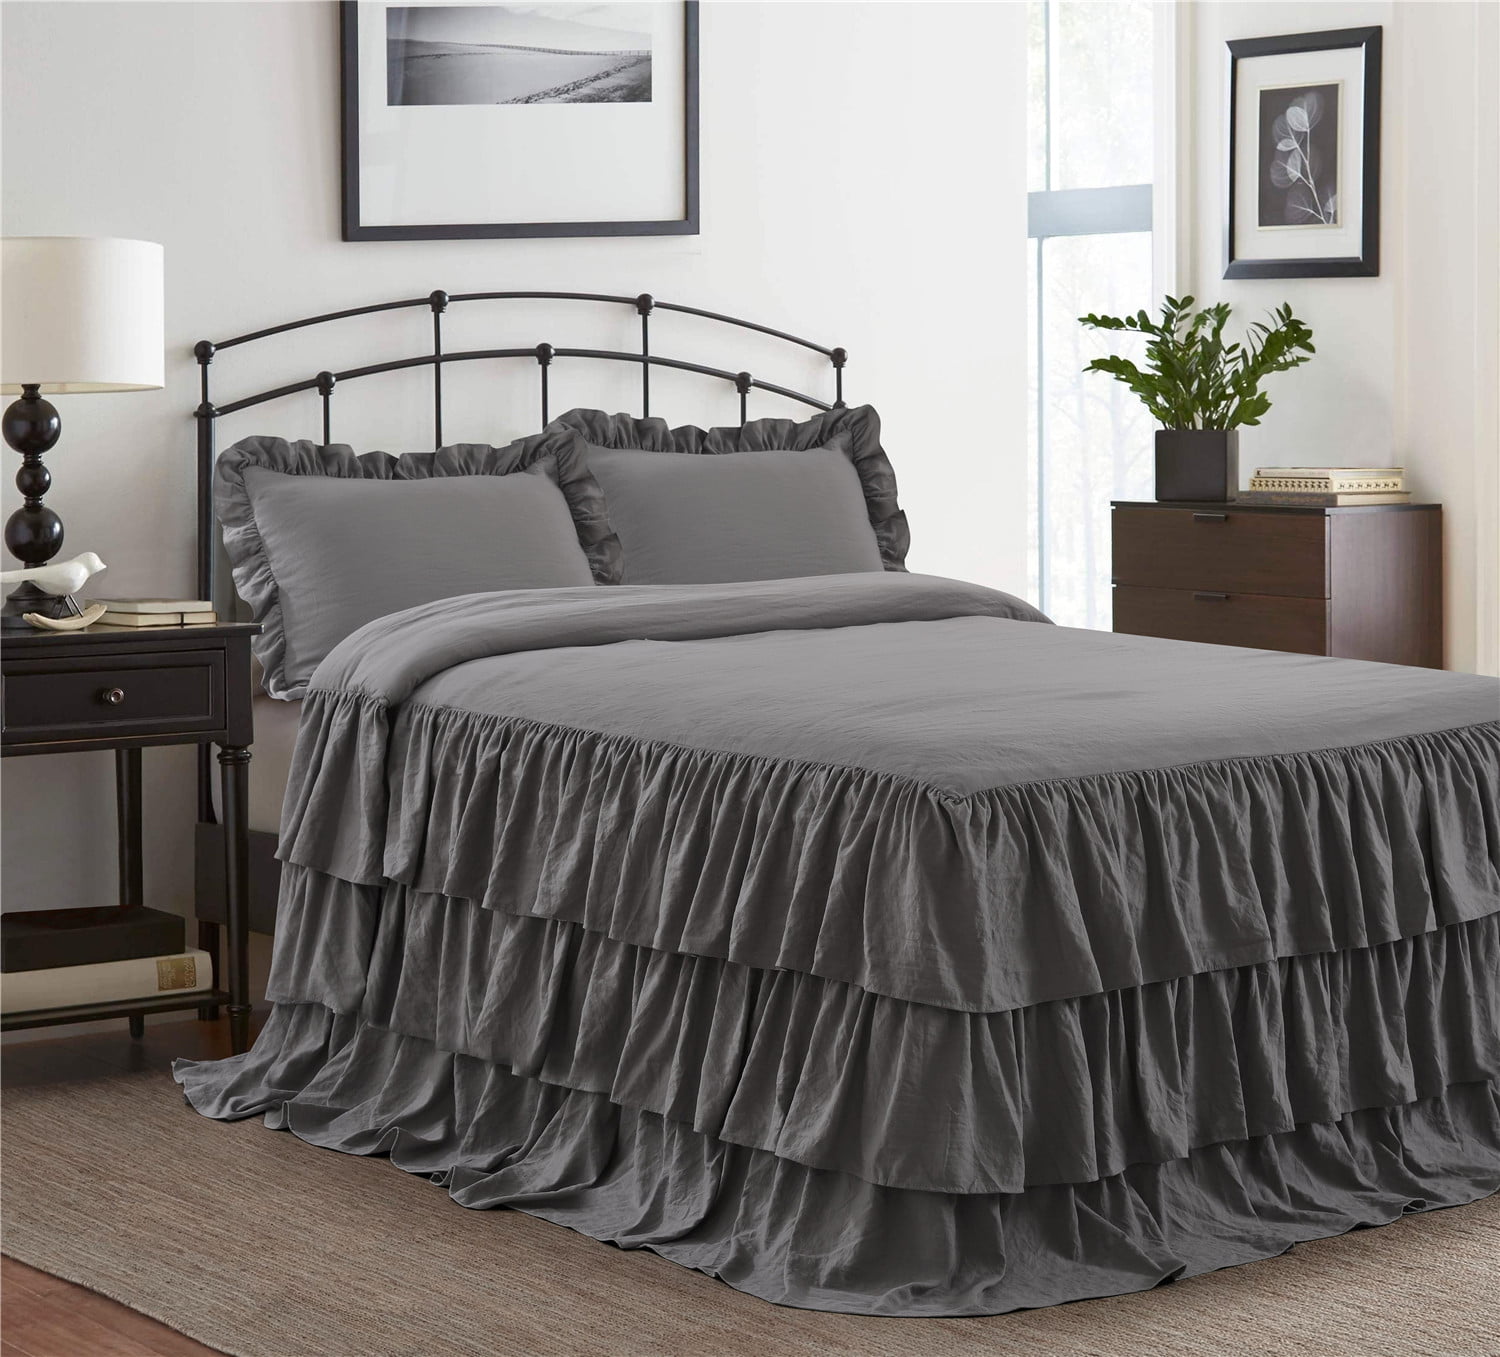 Hig 3 Piece Ruffle Skirt Bedspread Set, What Size Bedspread For King Bed